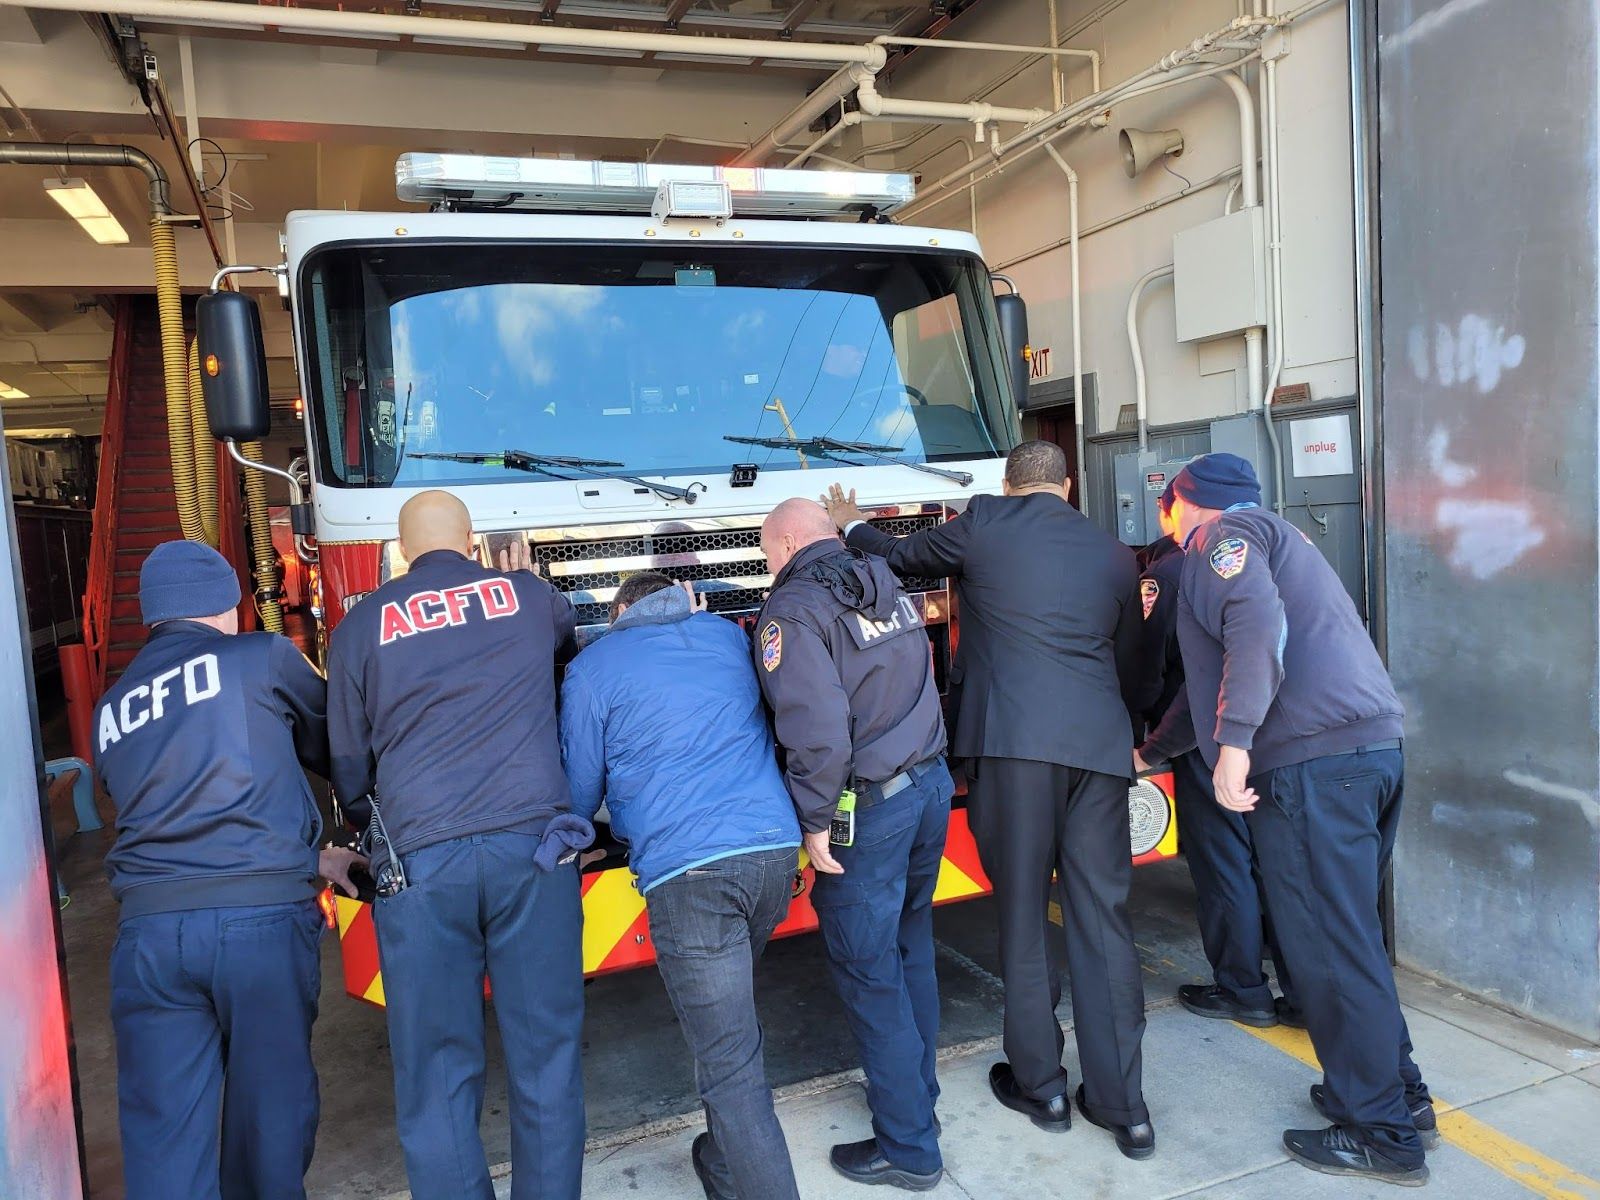 Mayor Marty Small Sr. and members of the Atlantic City Fire Department push Engine 3 into Station 3 located at Indiana and Grant avenues. Image Source: City of Atlantic City